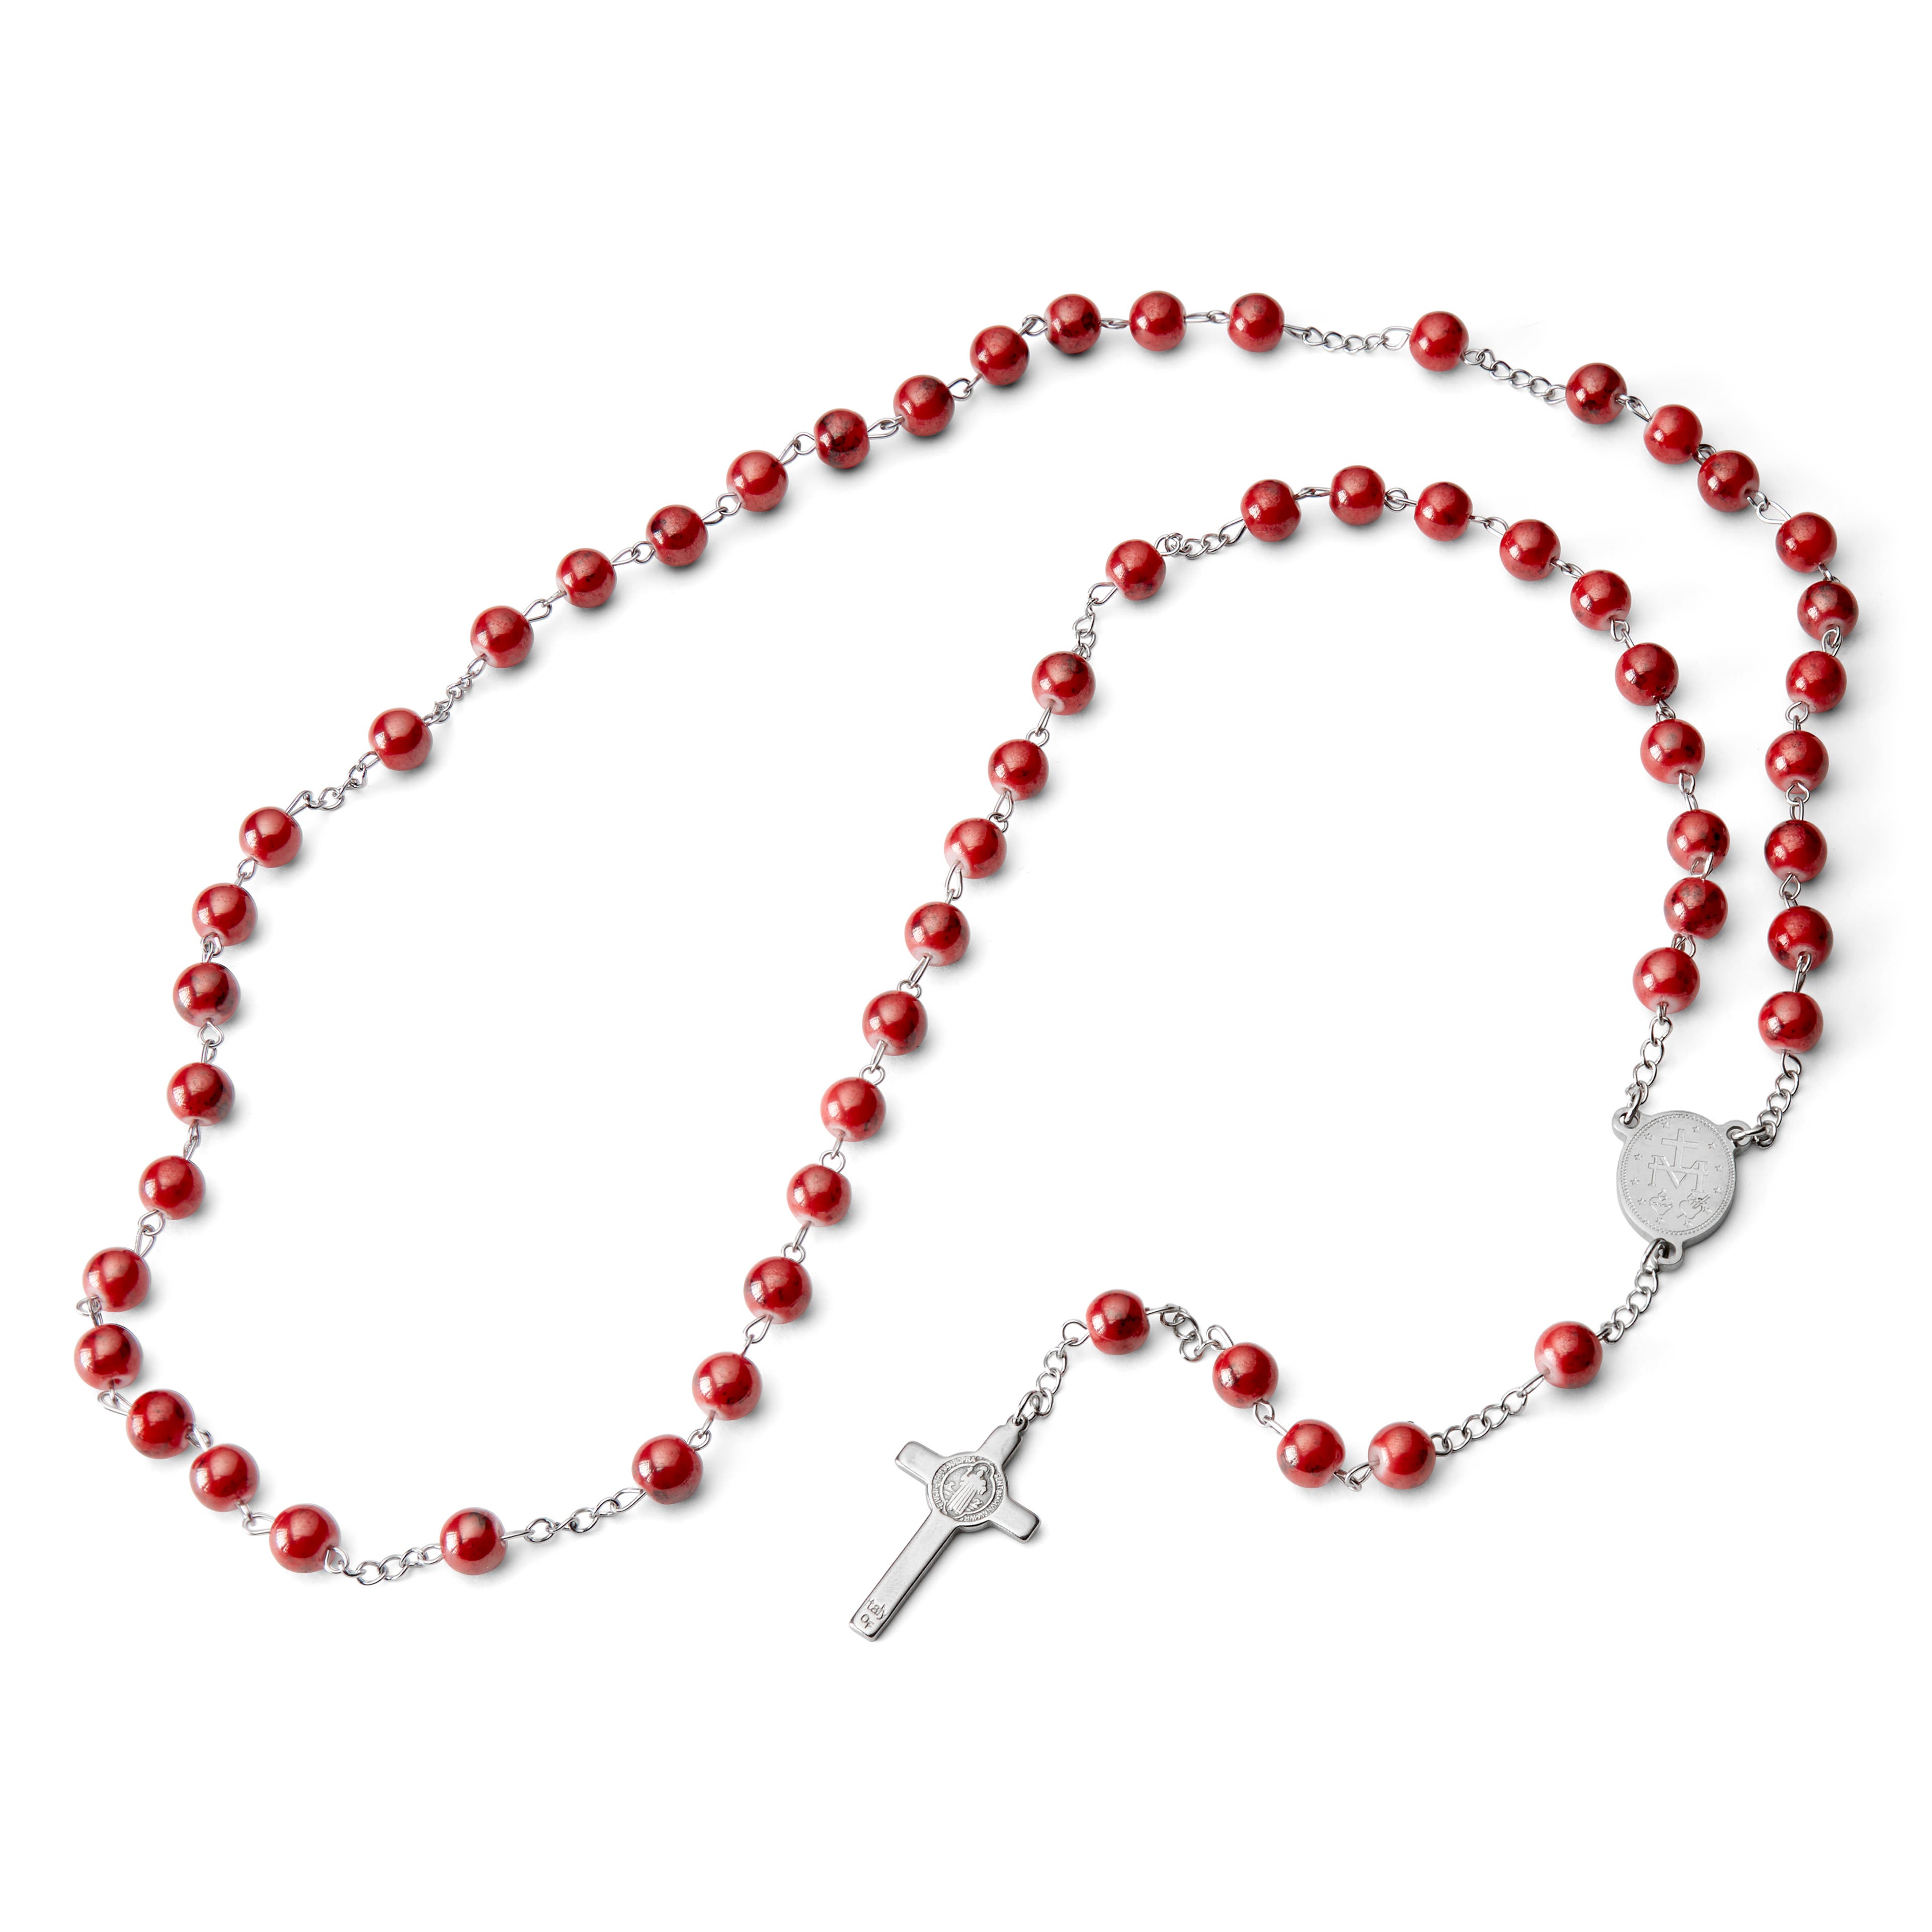 Silver-Tone & Red Rosary With Silver-Tone Our Lady Of Guadalupe & Cross Beads Necklace